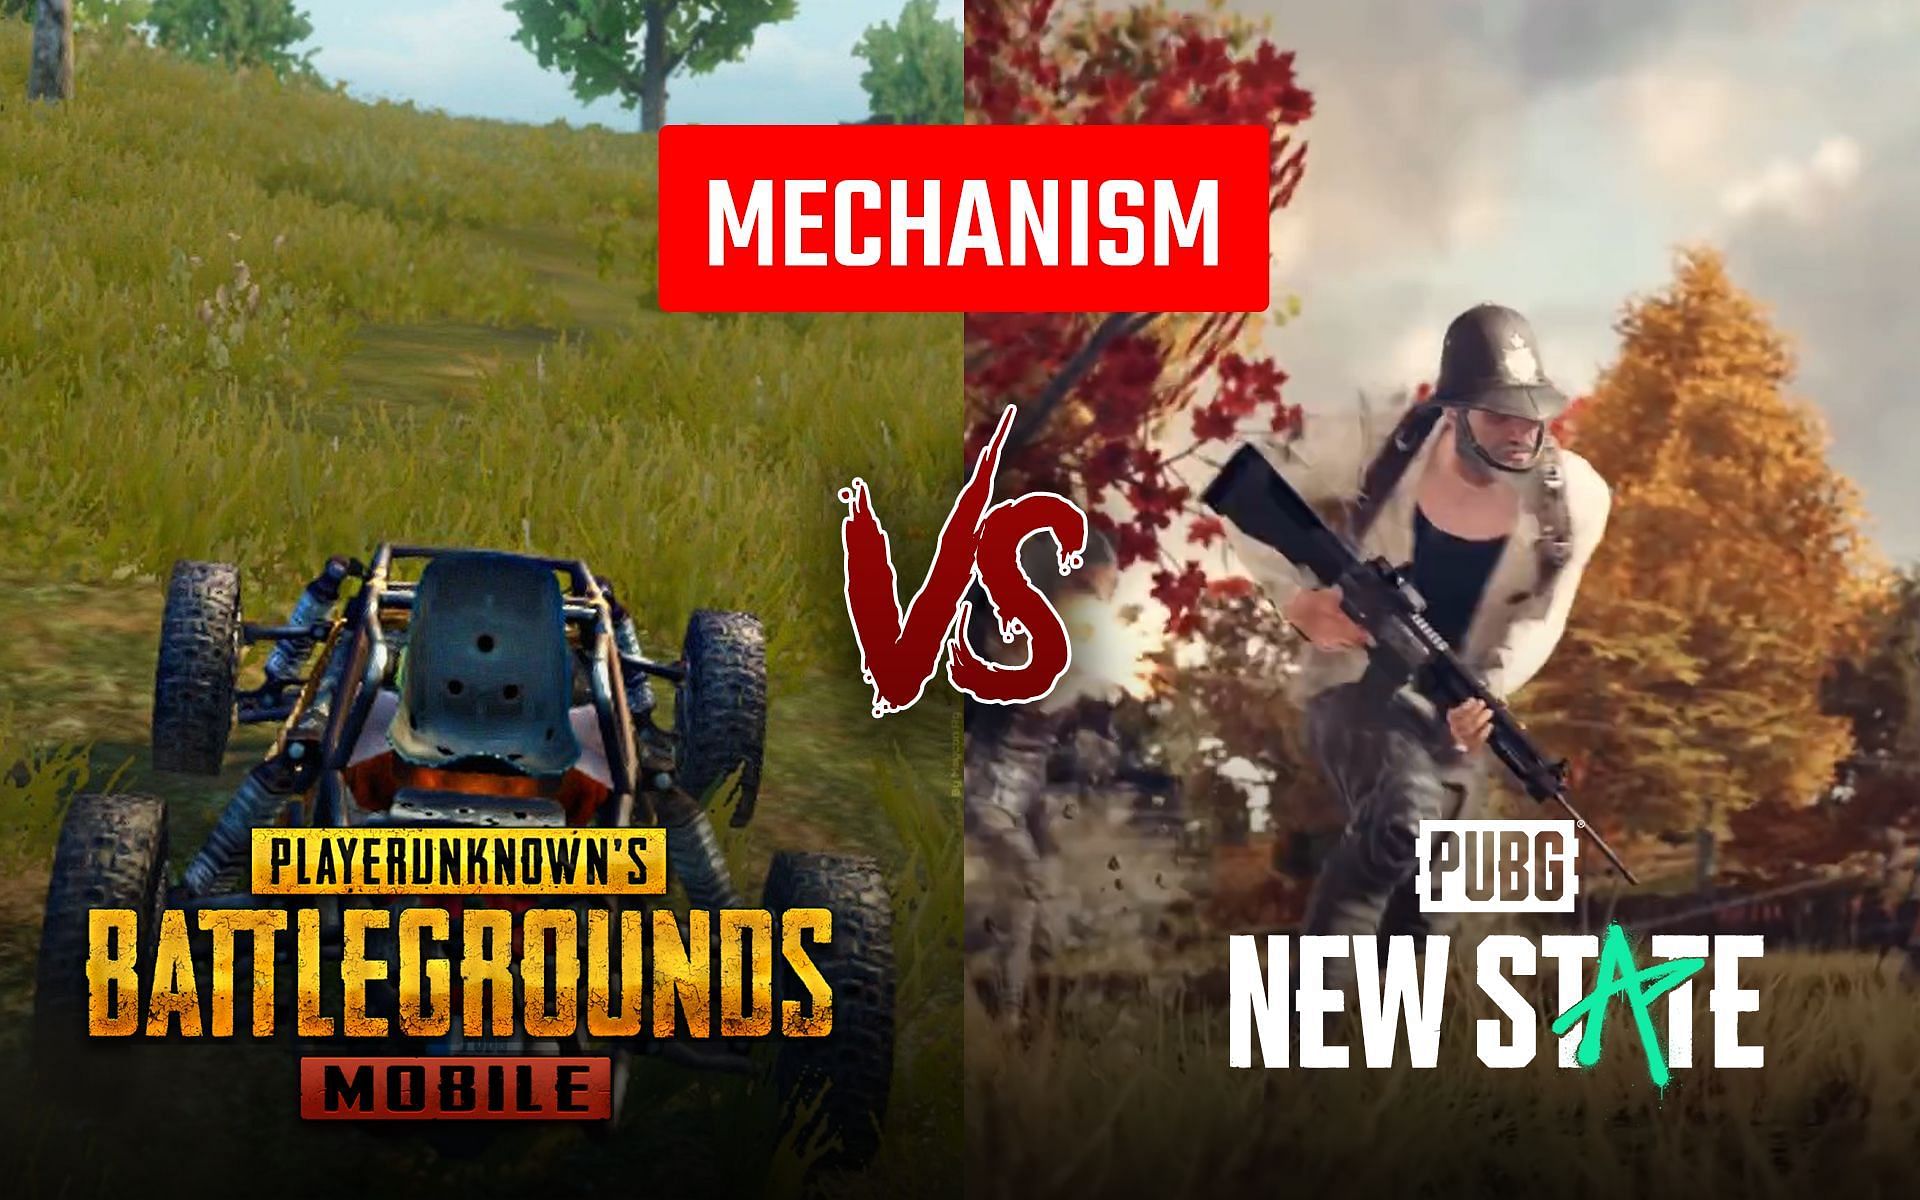 Assessing the game mechanics in PUBG Mobile and PUBG New State (Image via Sportskeeda)